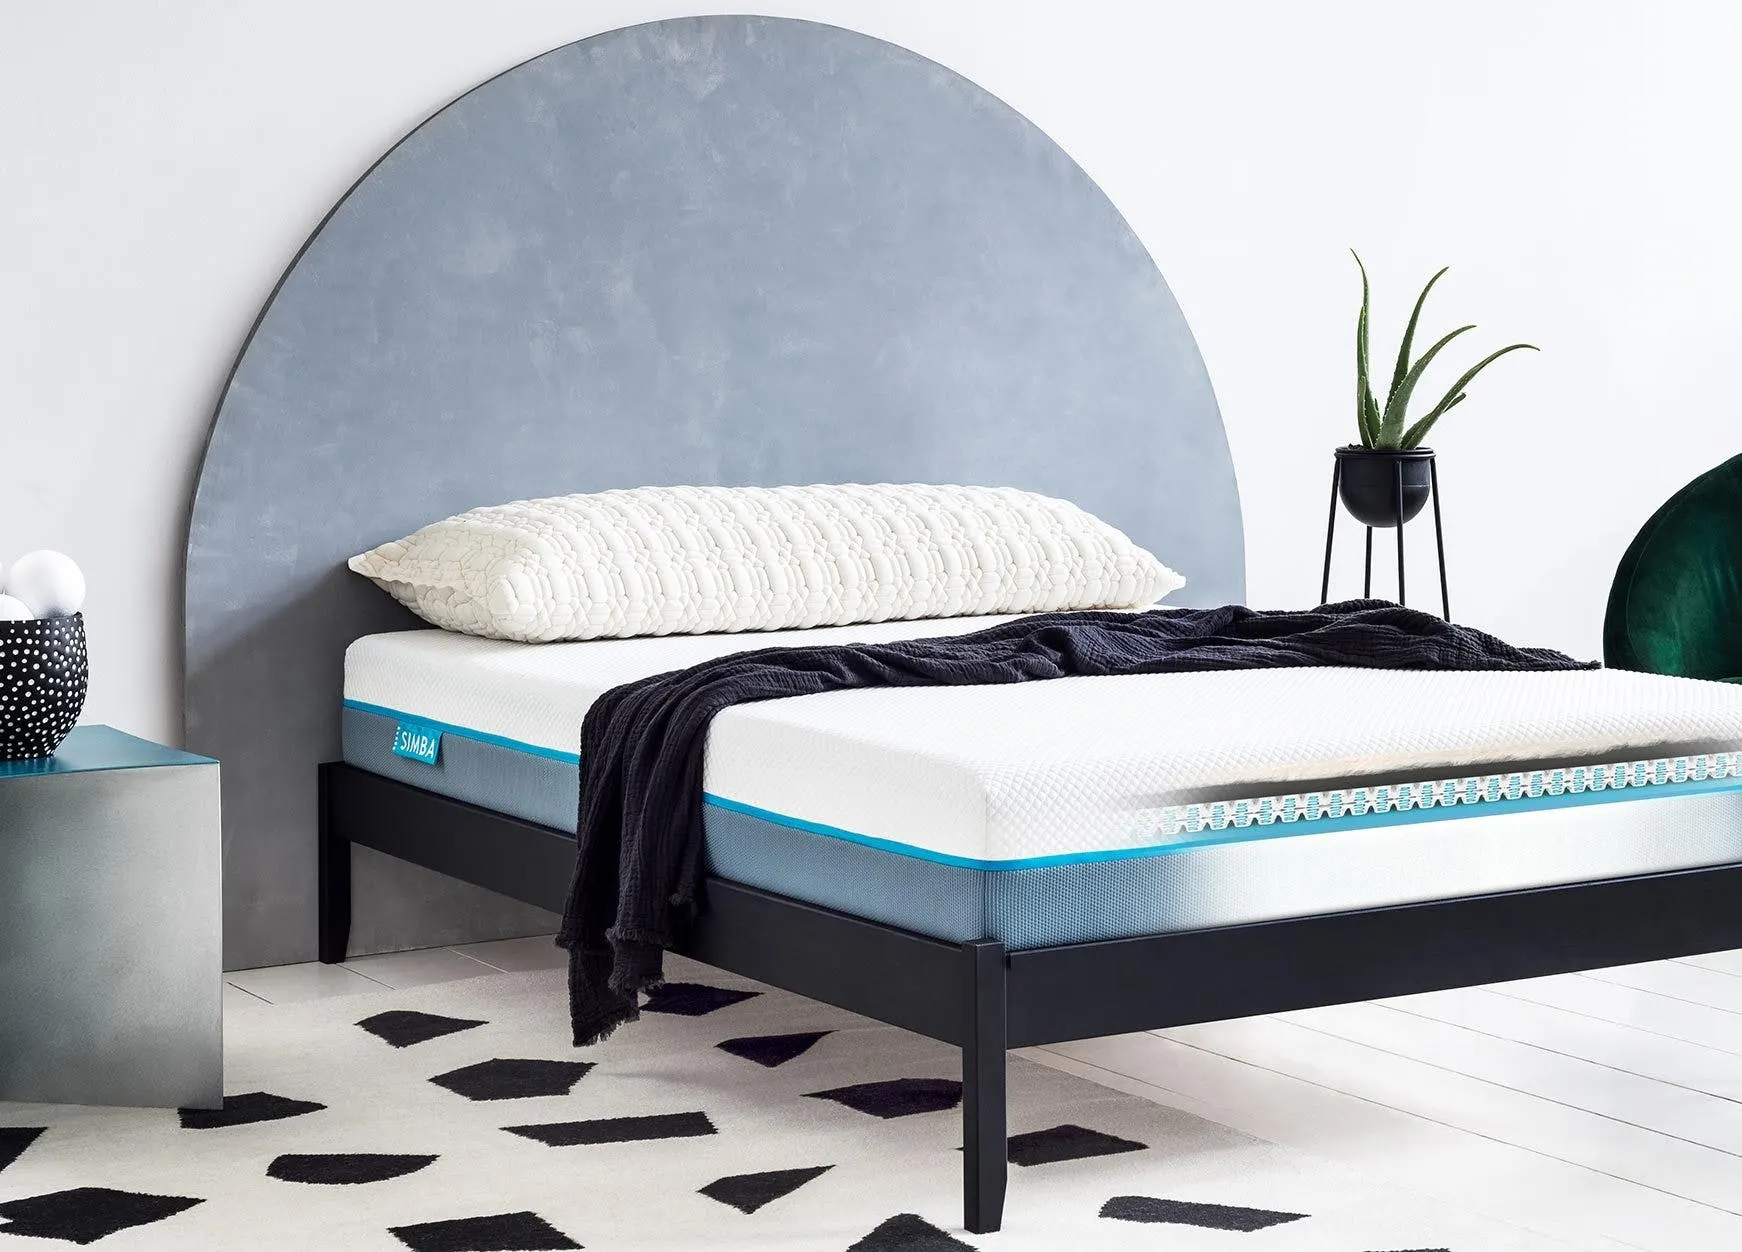 Simba Hybrid Pro Mattress Review – Is this the best memory foam mattress and worth the upgrade over the standard Simba?